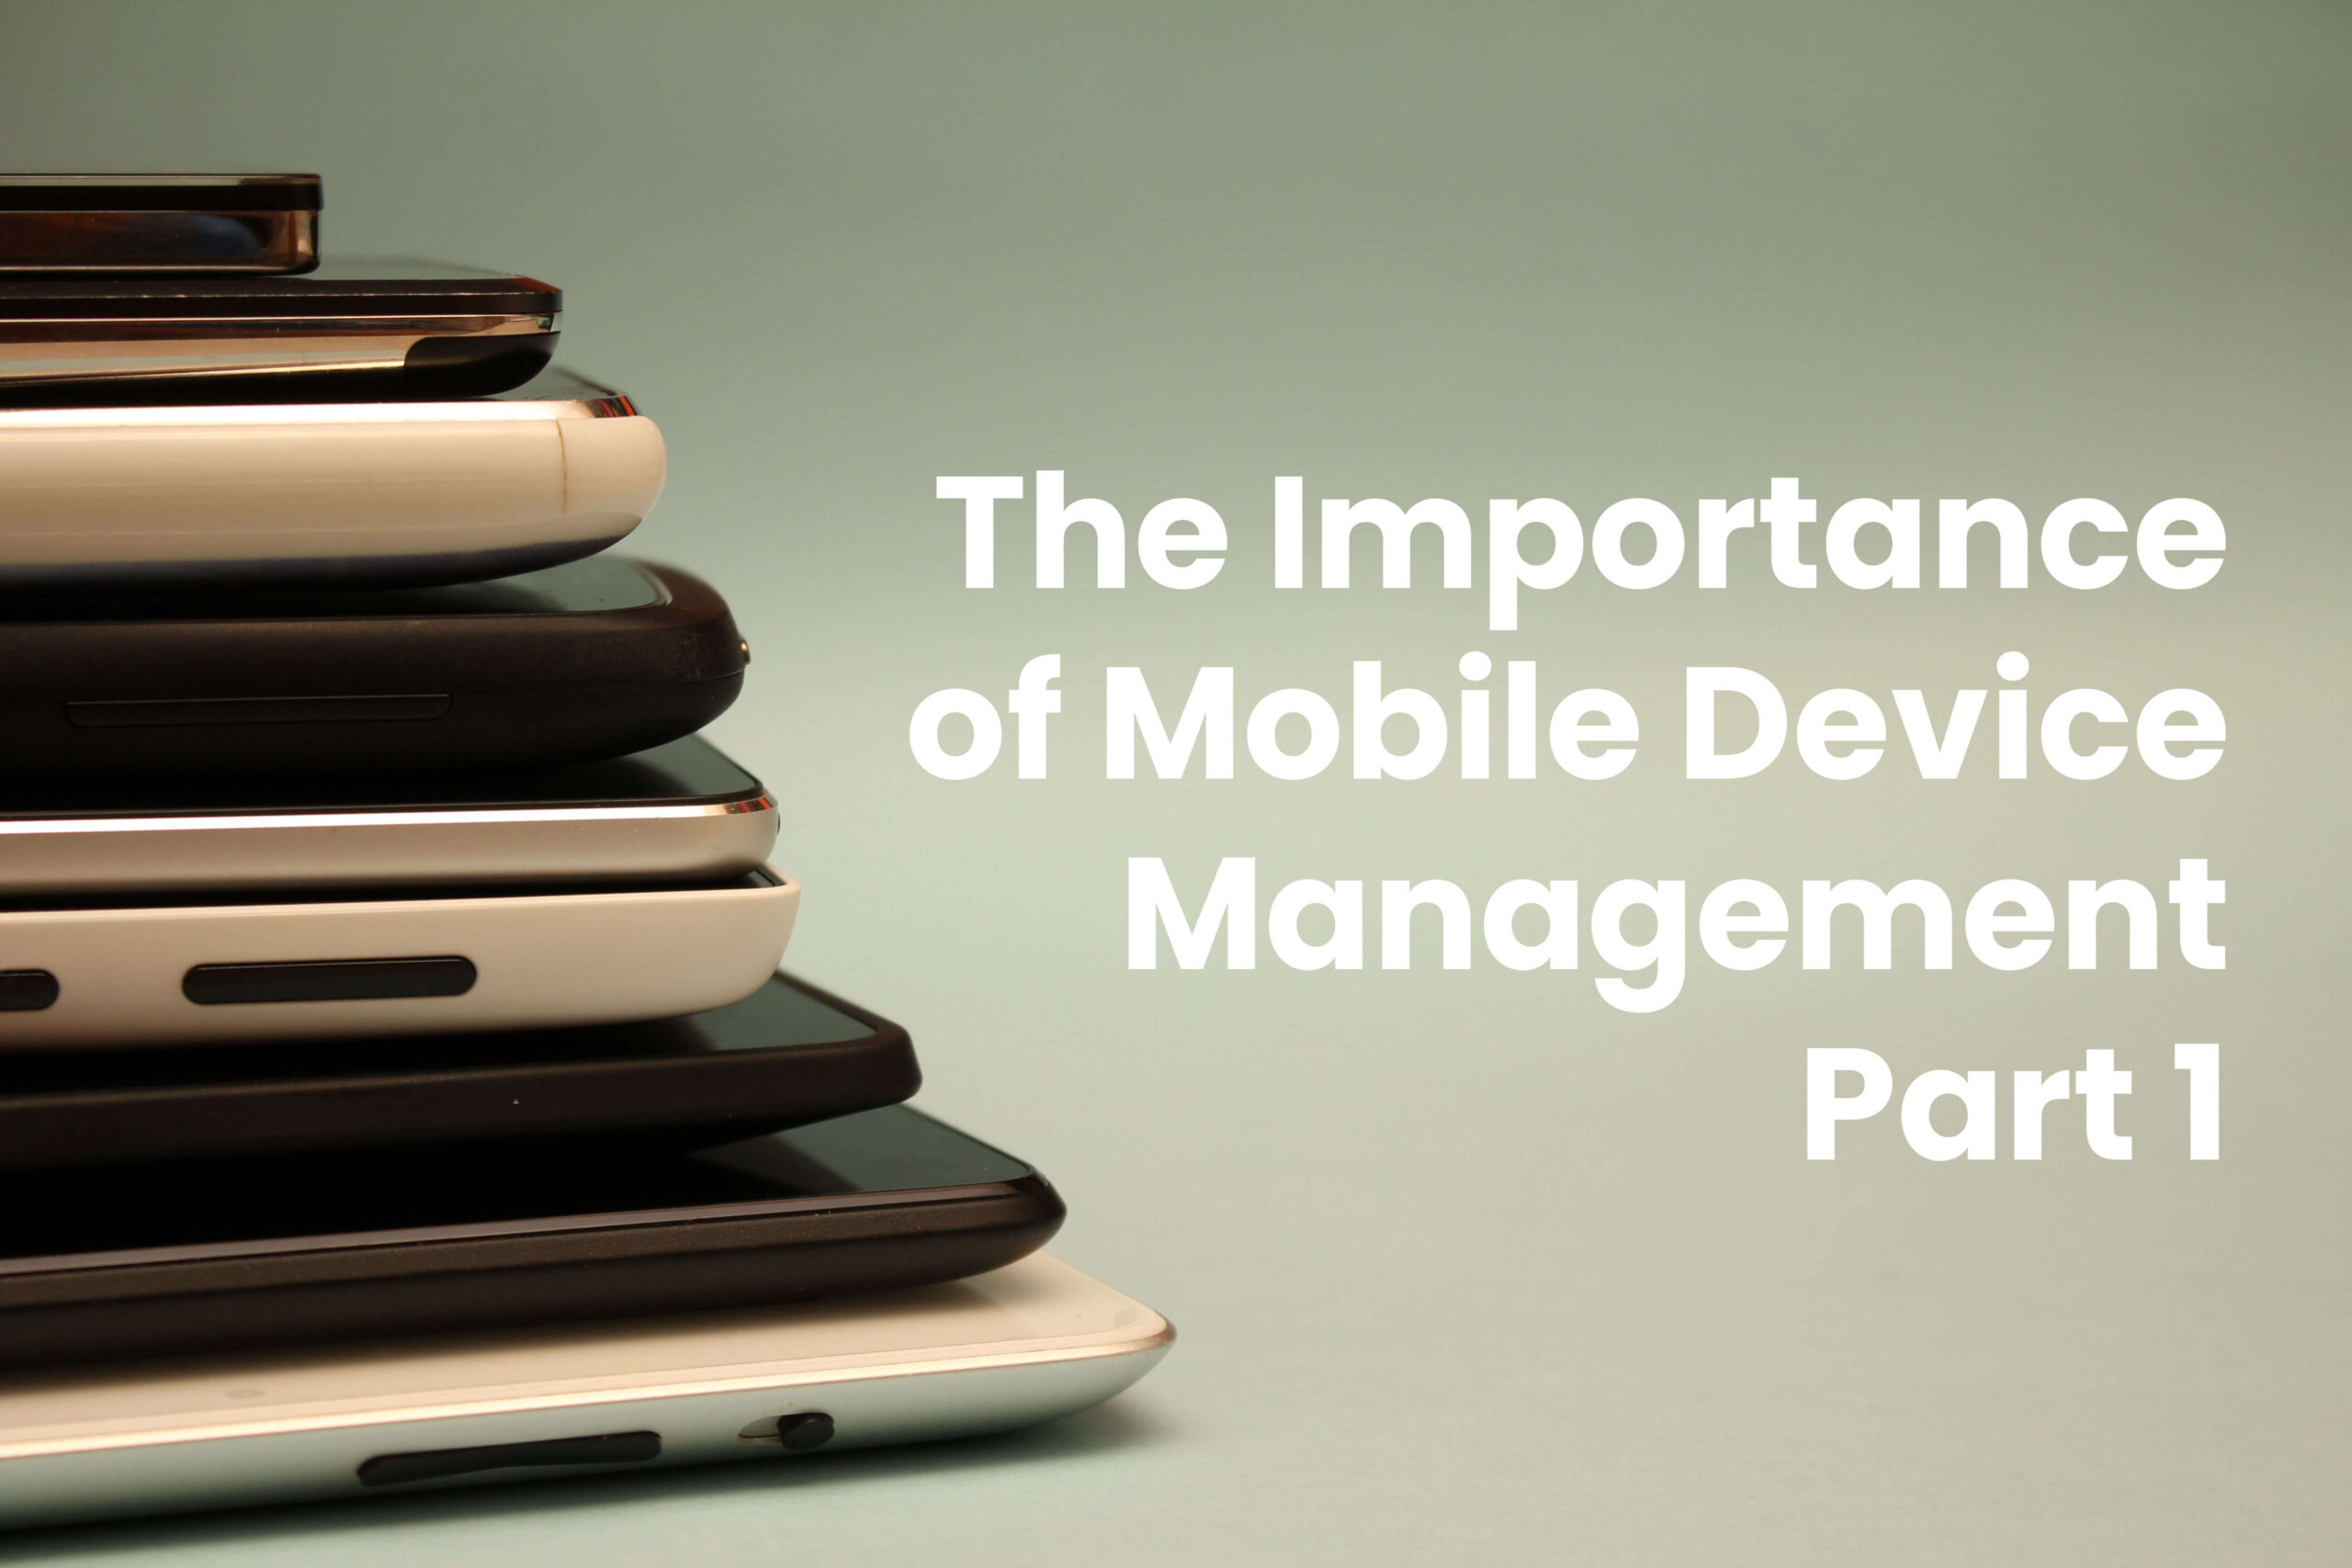 The importance of mobile device management blog cover